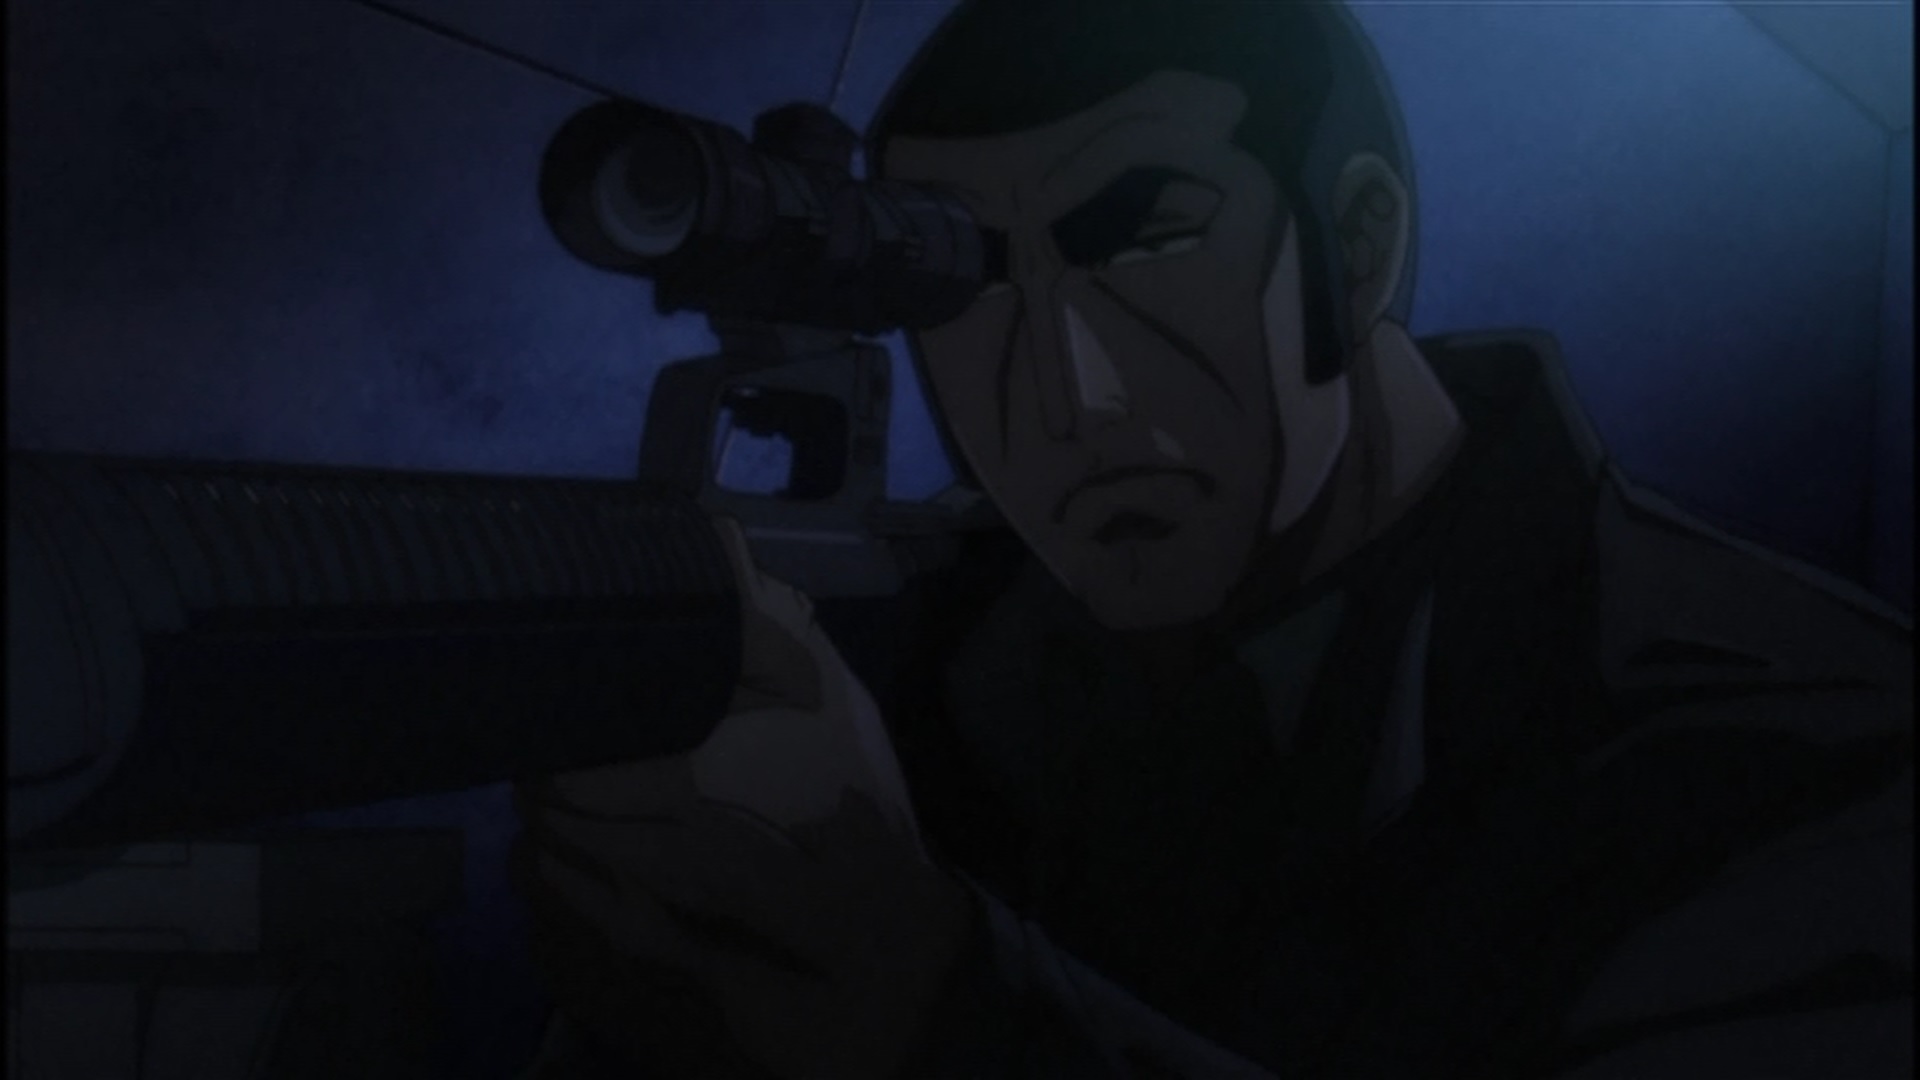 Golgo 13 is an animated series written by Takao Saito.